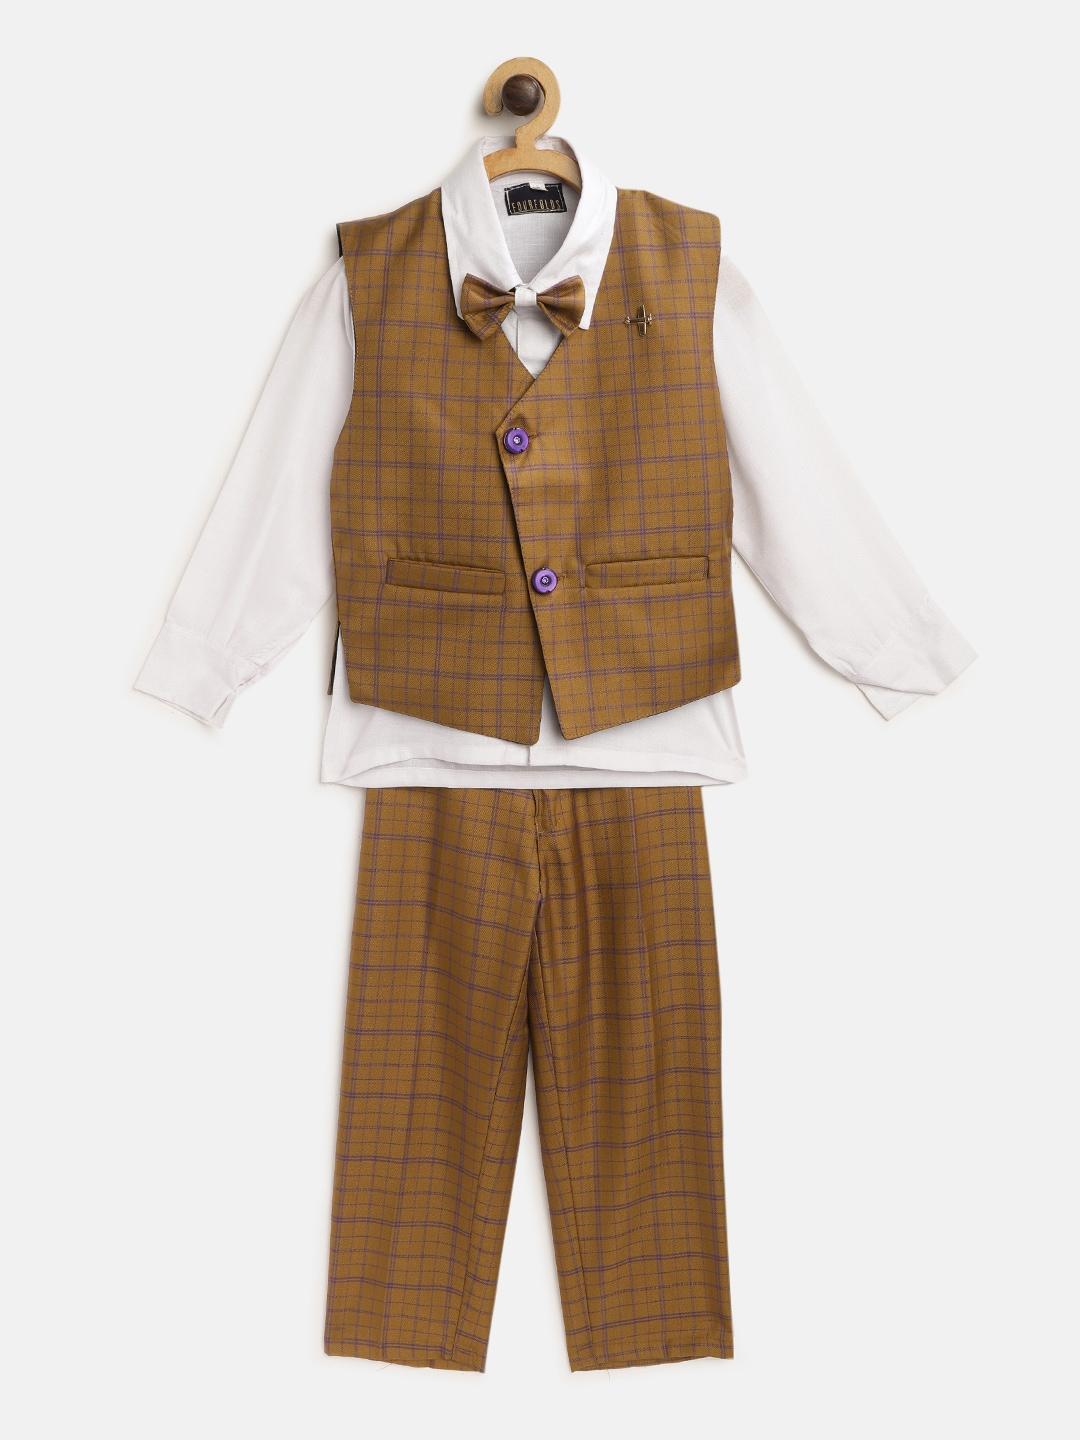 fourfolds-boys-white-&-mustard-yellow-solid-clothing-set-with-waistcoat-&-bow